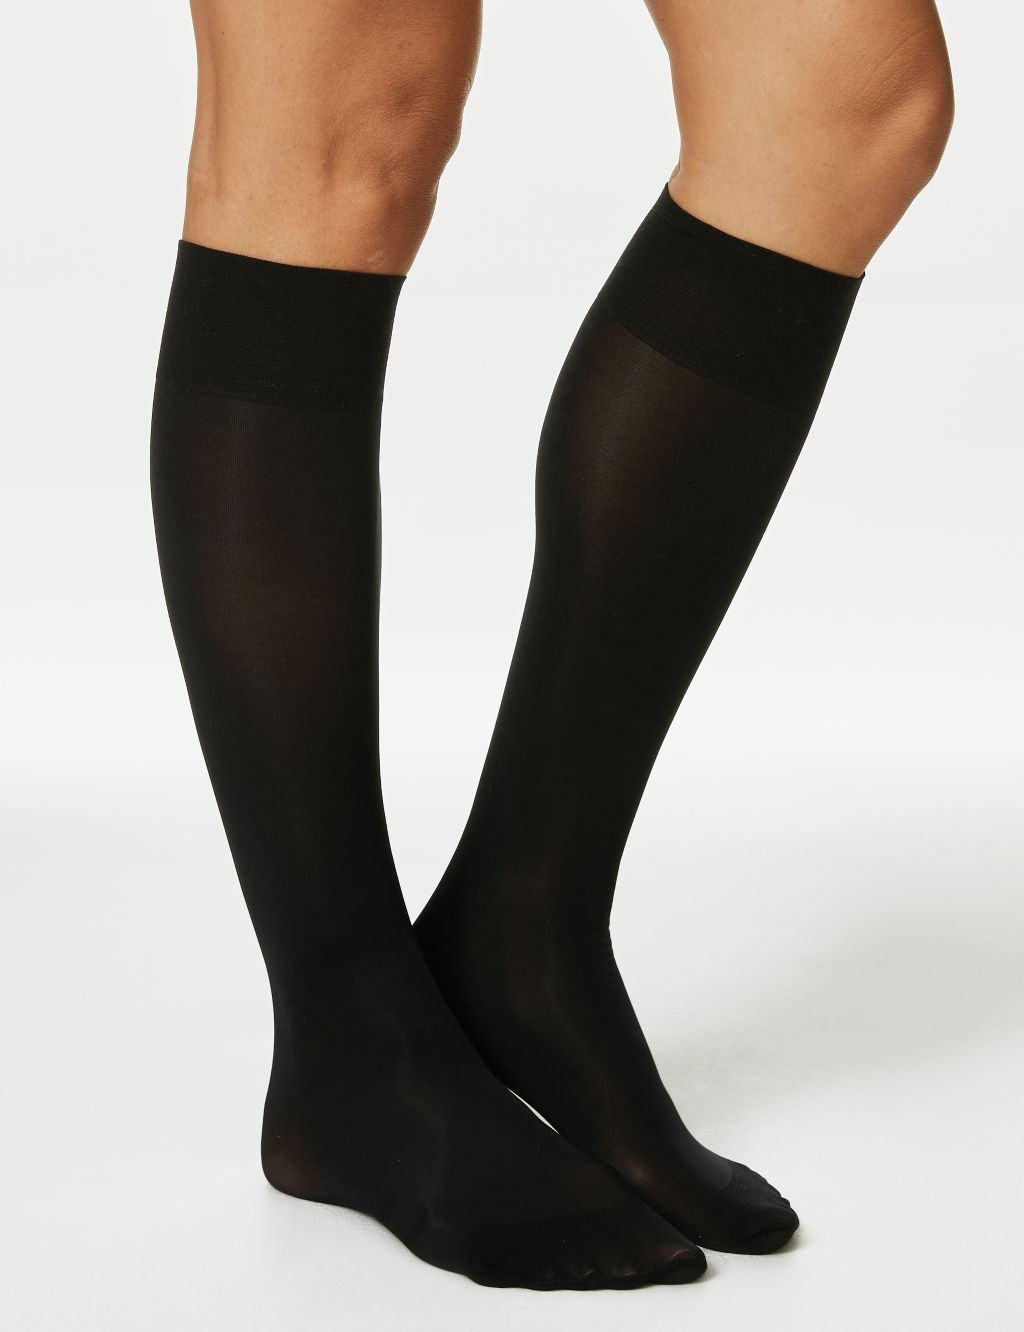 Dunnes Stores  Black 40 Denier Opaque Tights - Pack Of 3